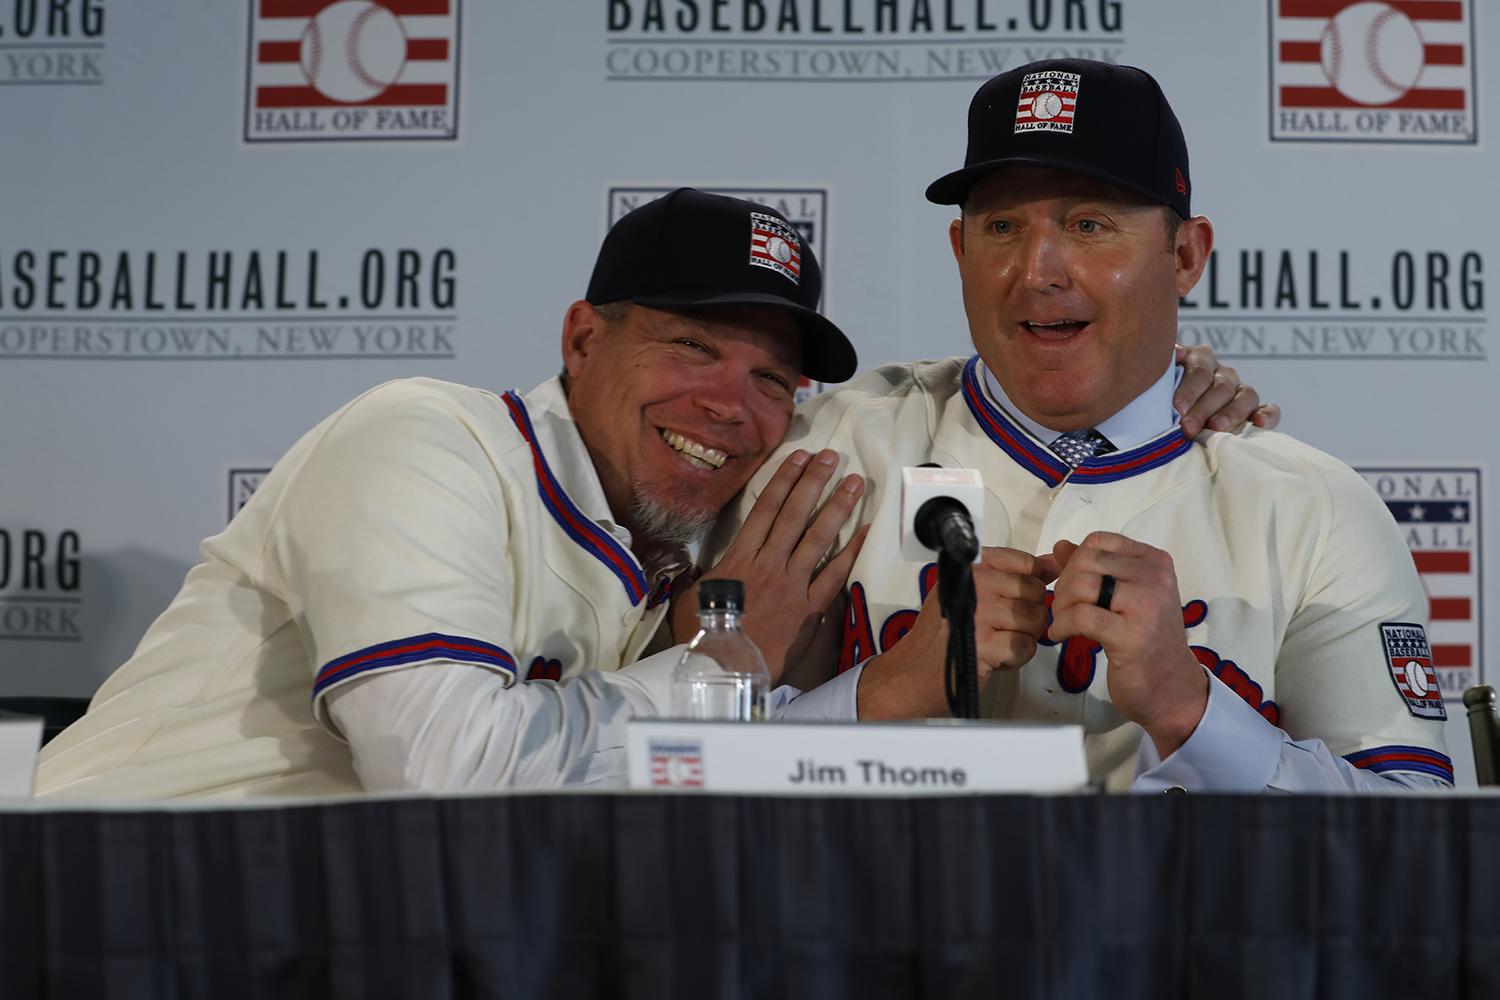 Chipper Jones and Jim Thome smile wearing their Hall Of Fame